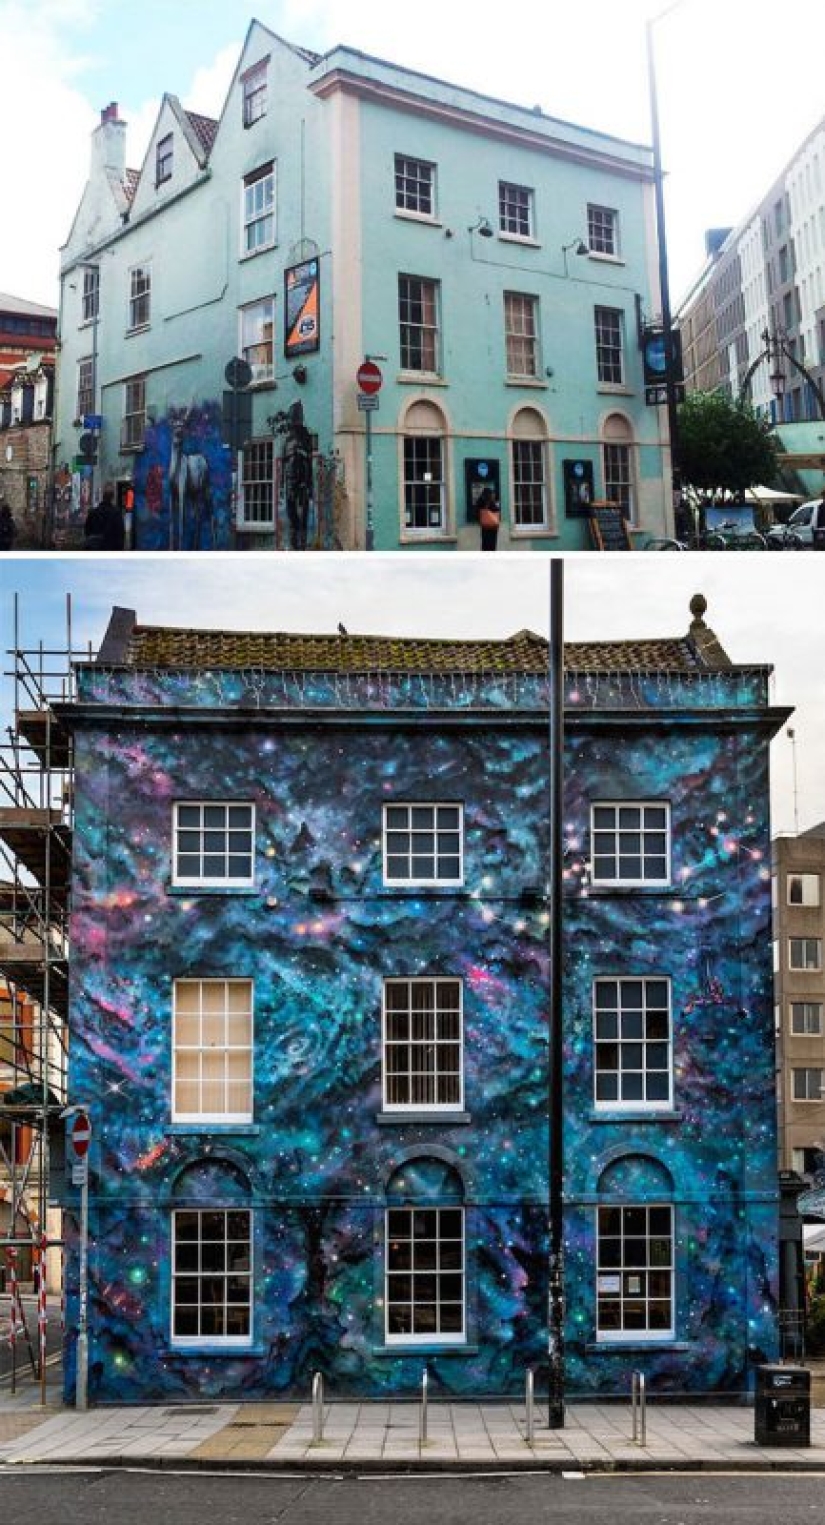 Paint the world in bright colors: the miraculous transformation of the gray buildings into works of art through graffiti